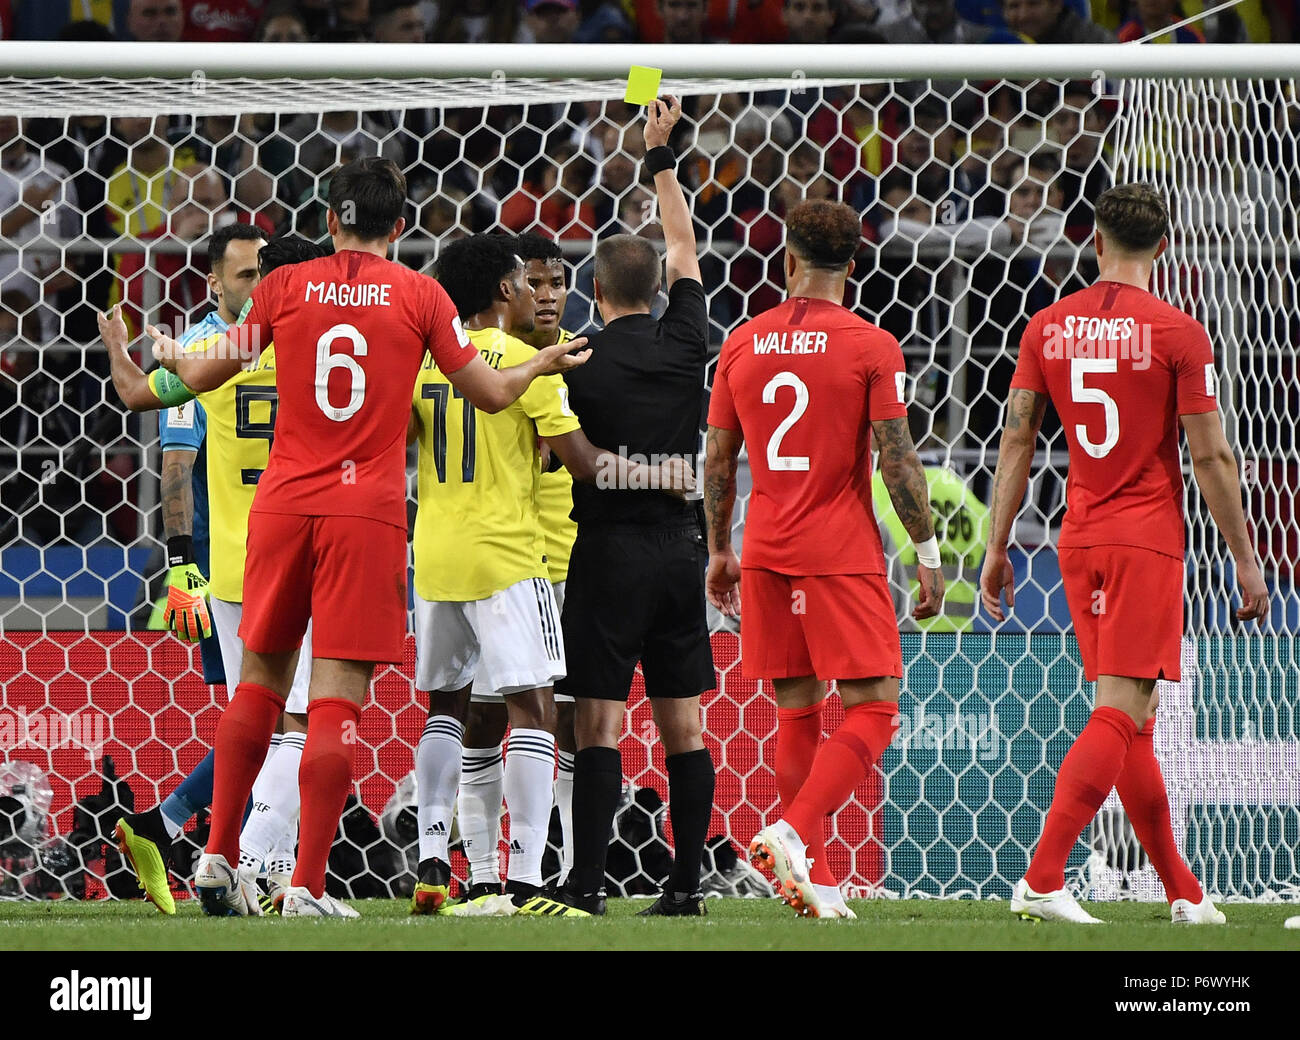 Moscow, Russia. 3rd July, 2018. The referee gives a yellow card to Wilmar Barrios (4th R) of Colombia during the 2018 FIFA World Cup round of 16 match between England and Colombia in Moscow, Russia, July 3, 2018. Credit: He Canling/Xinhua/Alamy Live News Stock Photo